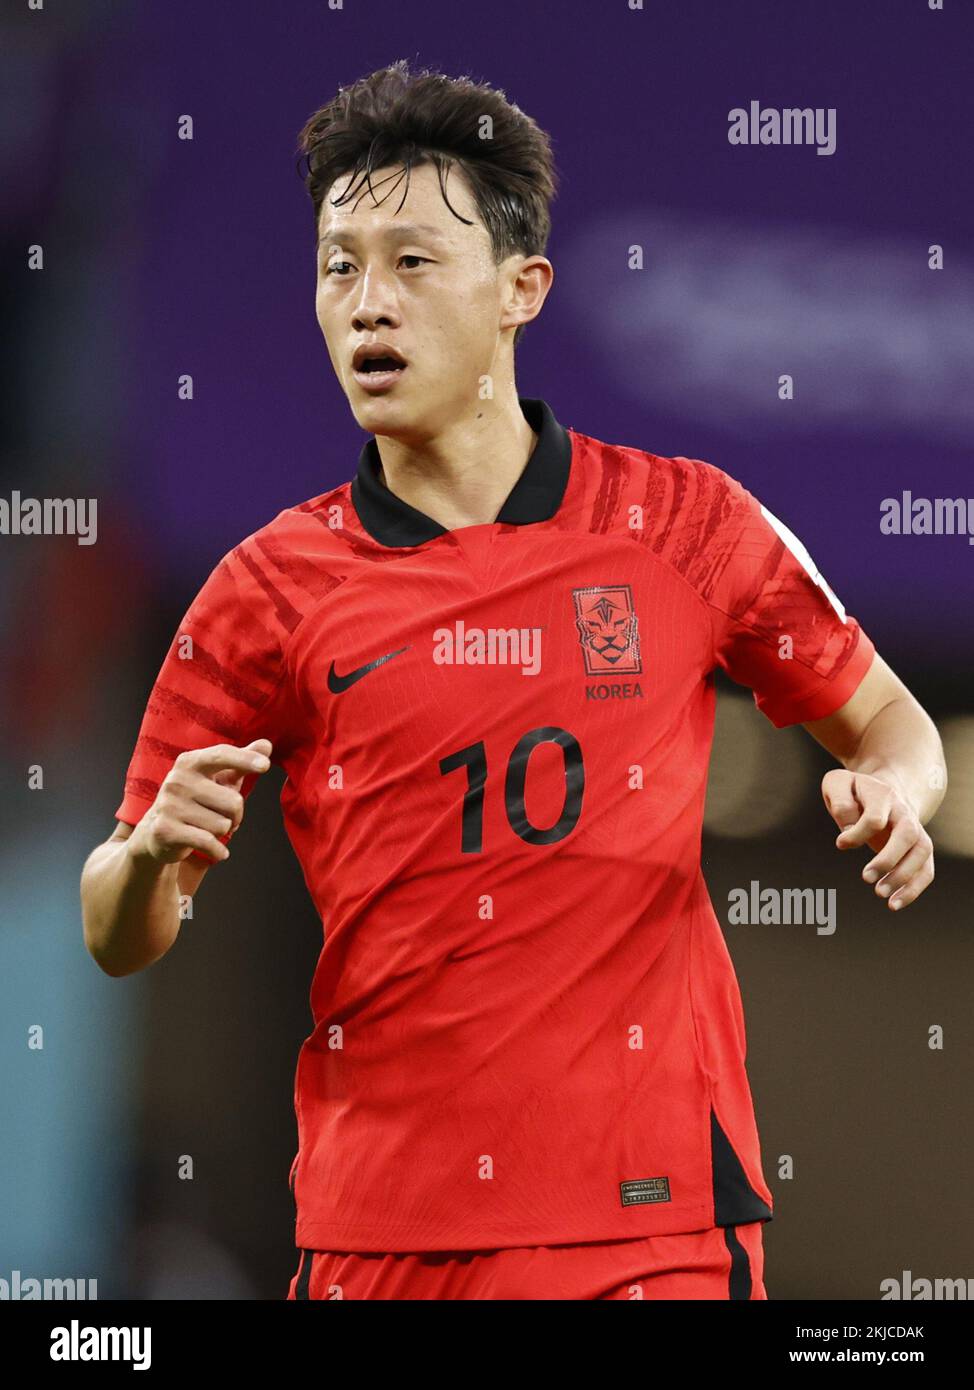 DOHA - Jae-sung Lee of Korea Republic during the FIFA World Cup Qatar 2022 group H match between Uruguay and South Korea at Education City Stadium on November 24, 2022 in Doha, Qatar. AP | Dutch Height | MAURICE OF STONE Credit: ANP/Alamy Live News Stock Photo